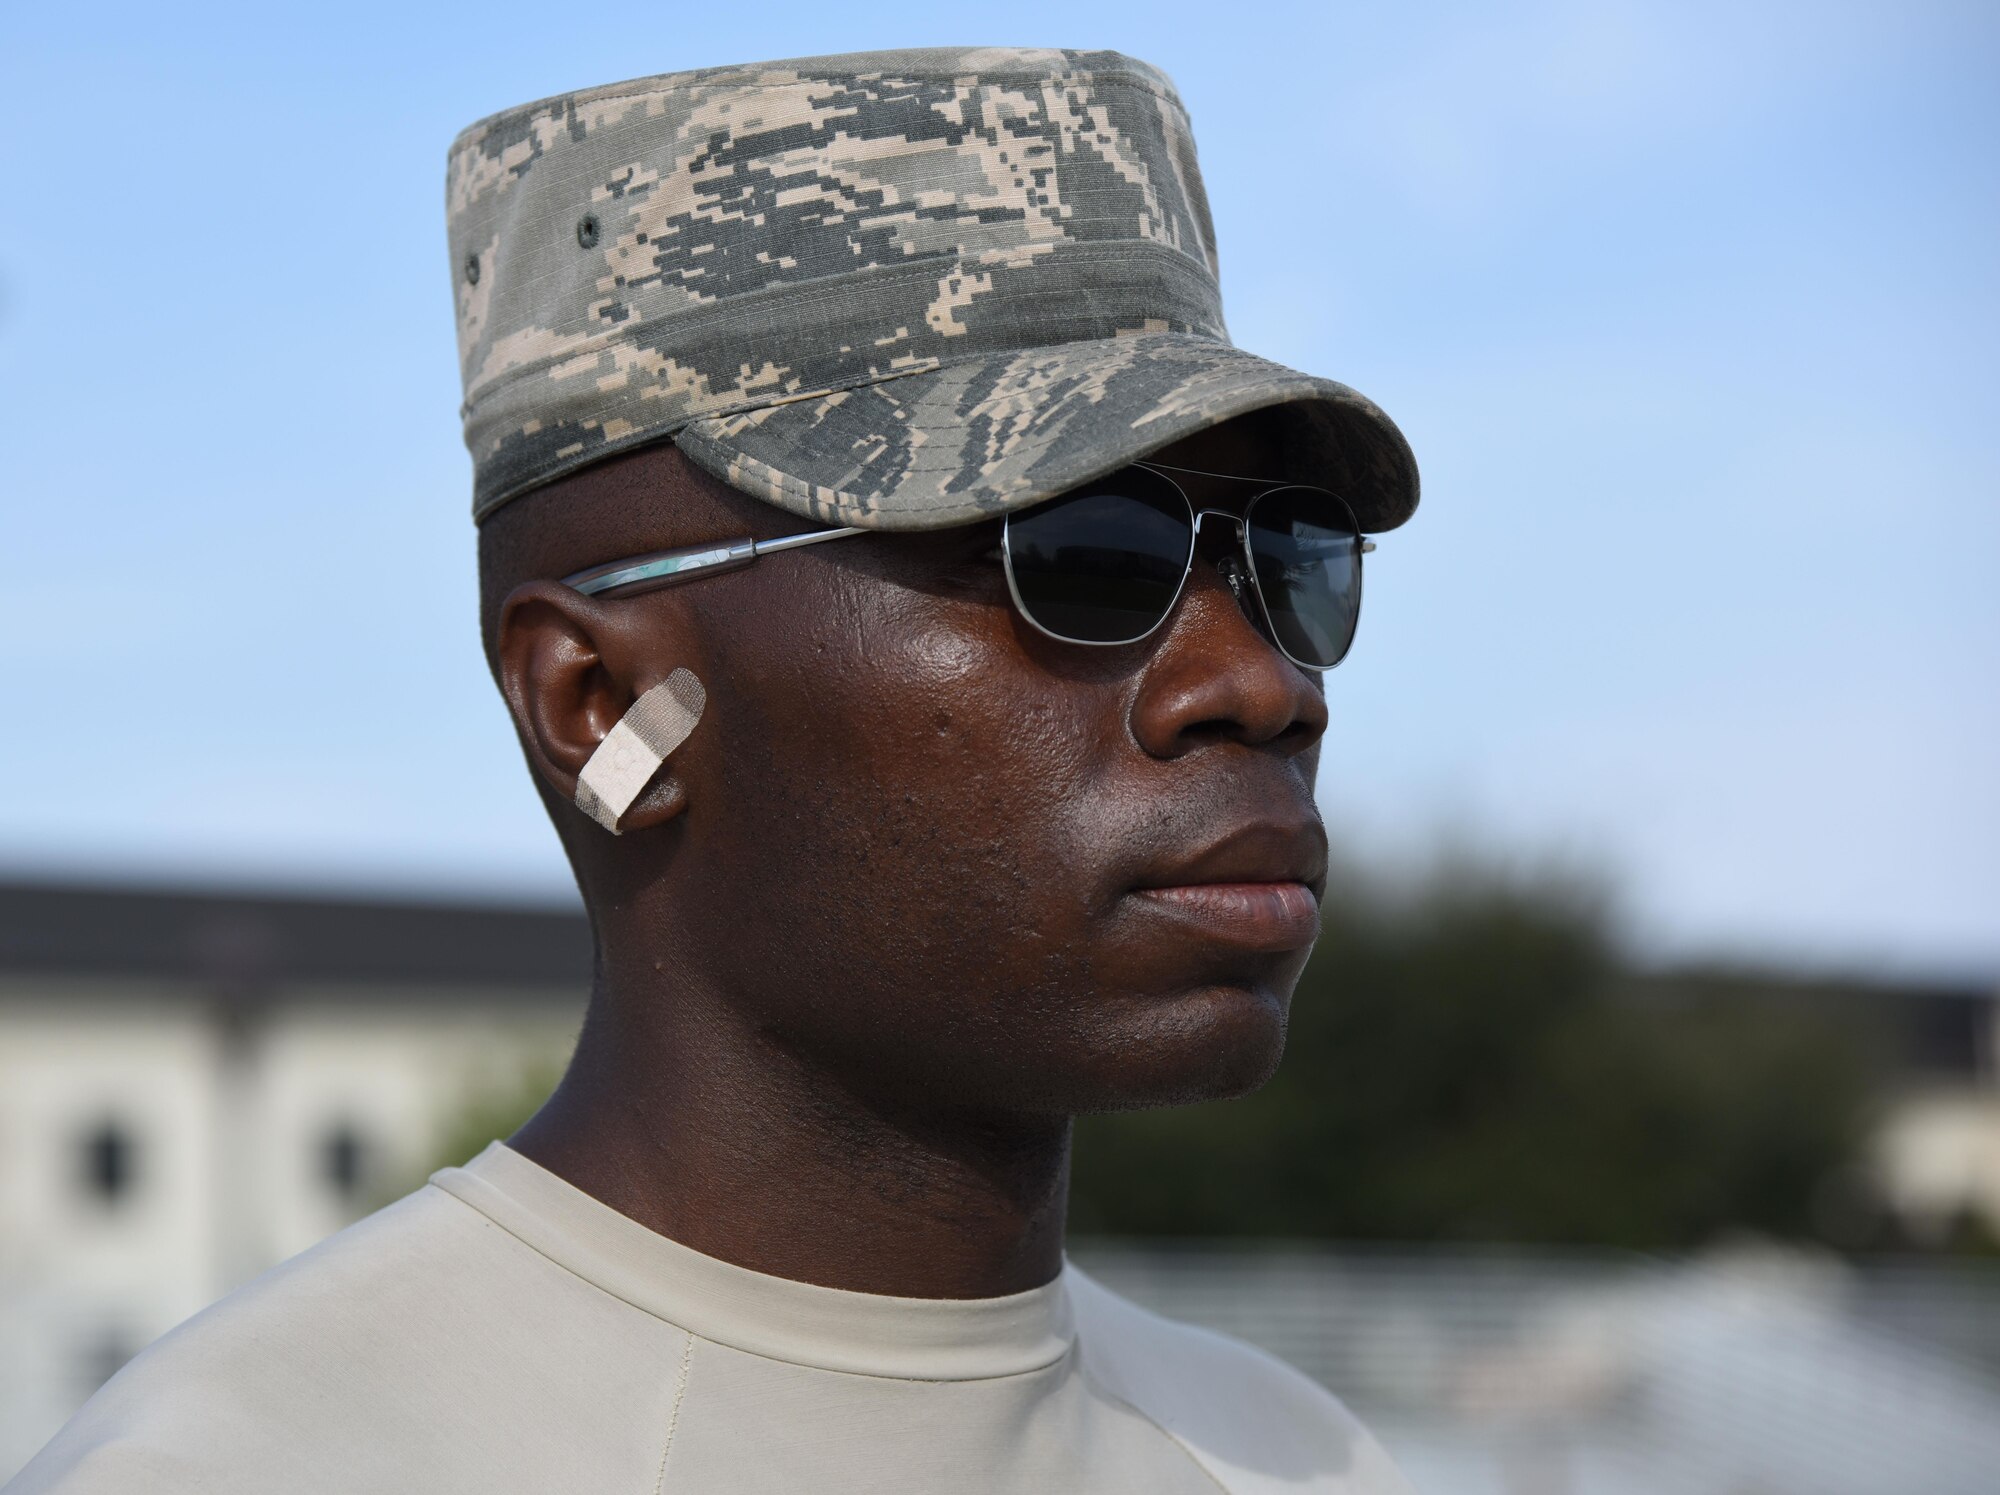 Airman 1st Class Coby Marshall, U.S. Air Force Honor Guard Drill Team member, wears a bandage on his ear to cover up an injury while practicing a new routine on the Levitow Training Support Facility drill pad Feb. 14, 2017, on Keesler Air Force Base, Miss. The team comes to Keesler every year for five weeks to develop a new routine, which is then revealed during an 81st Training Group drill down competition. The team preforms the routine used throughout the year. (U.S. Air Force photo by Kemberly Groue)